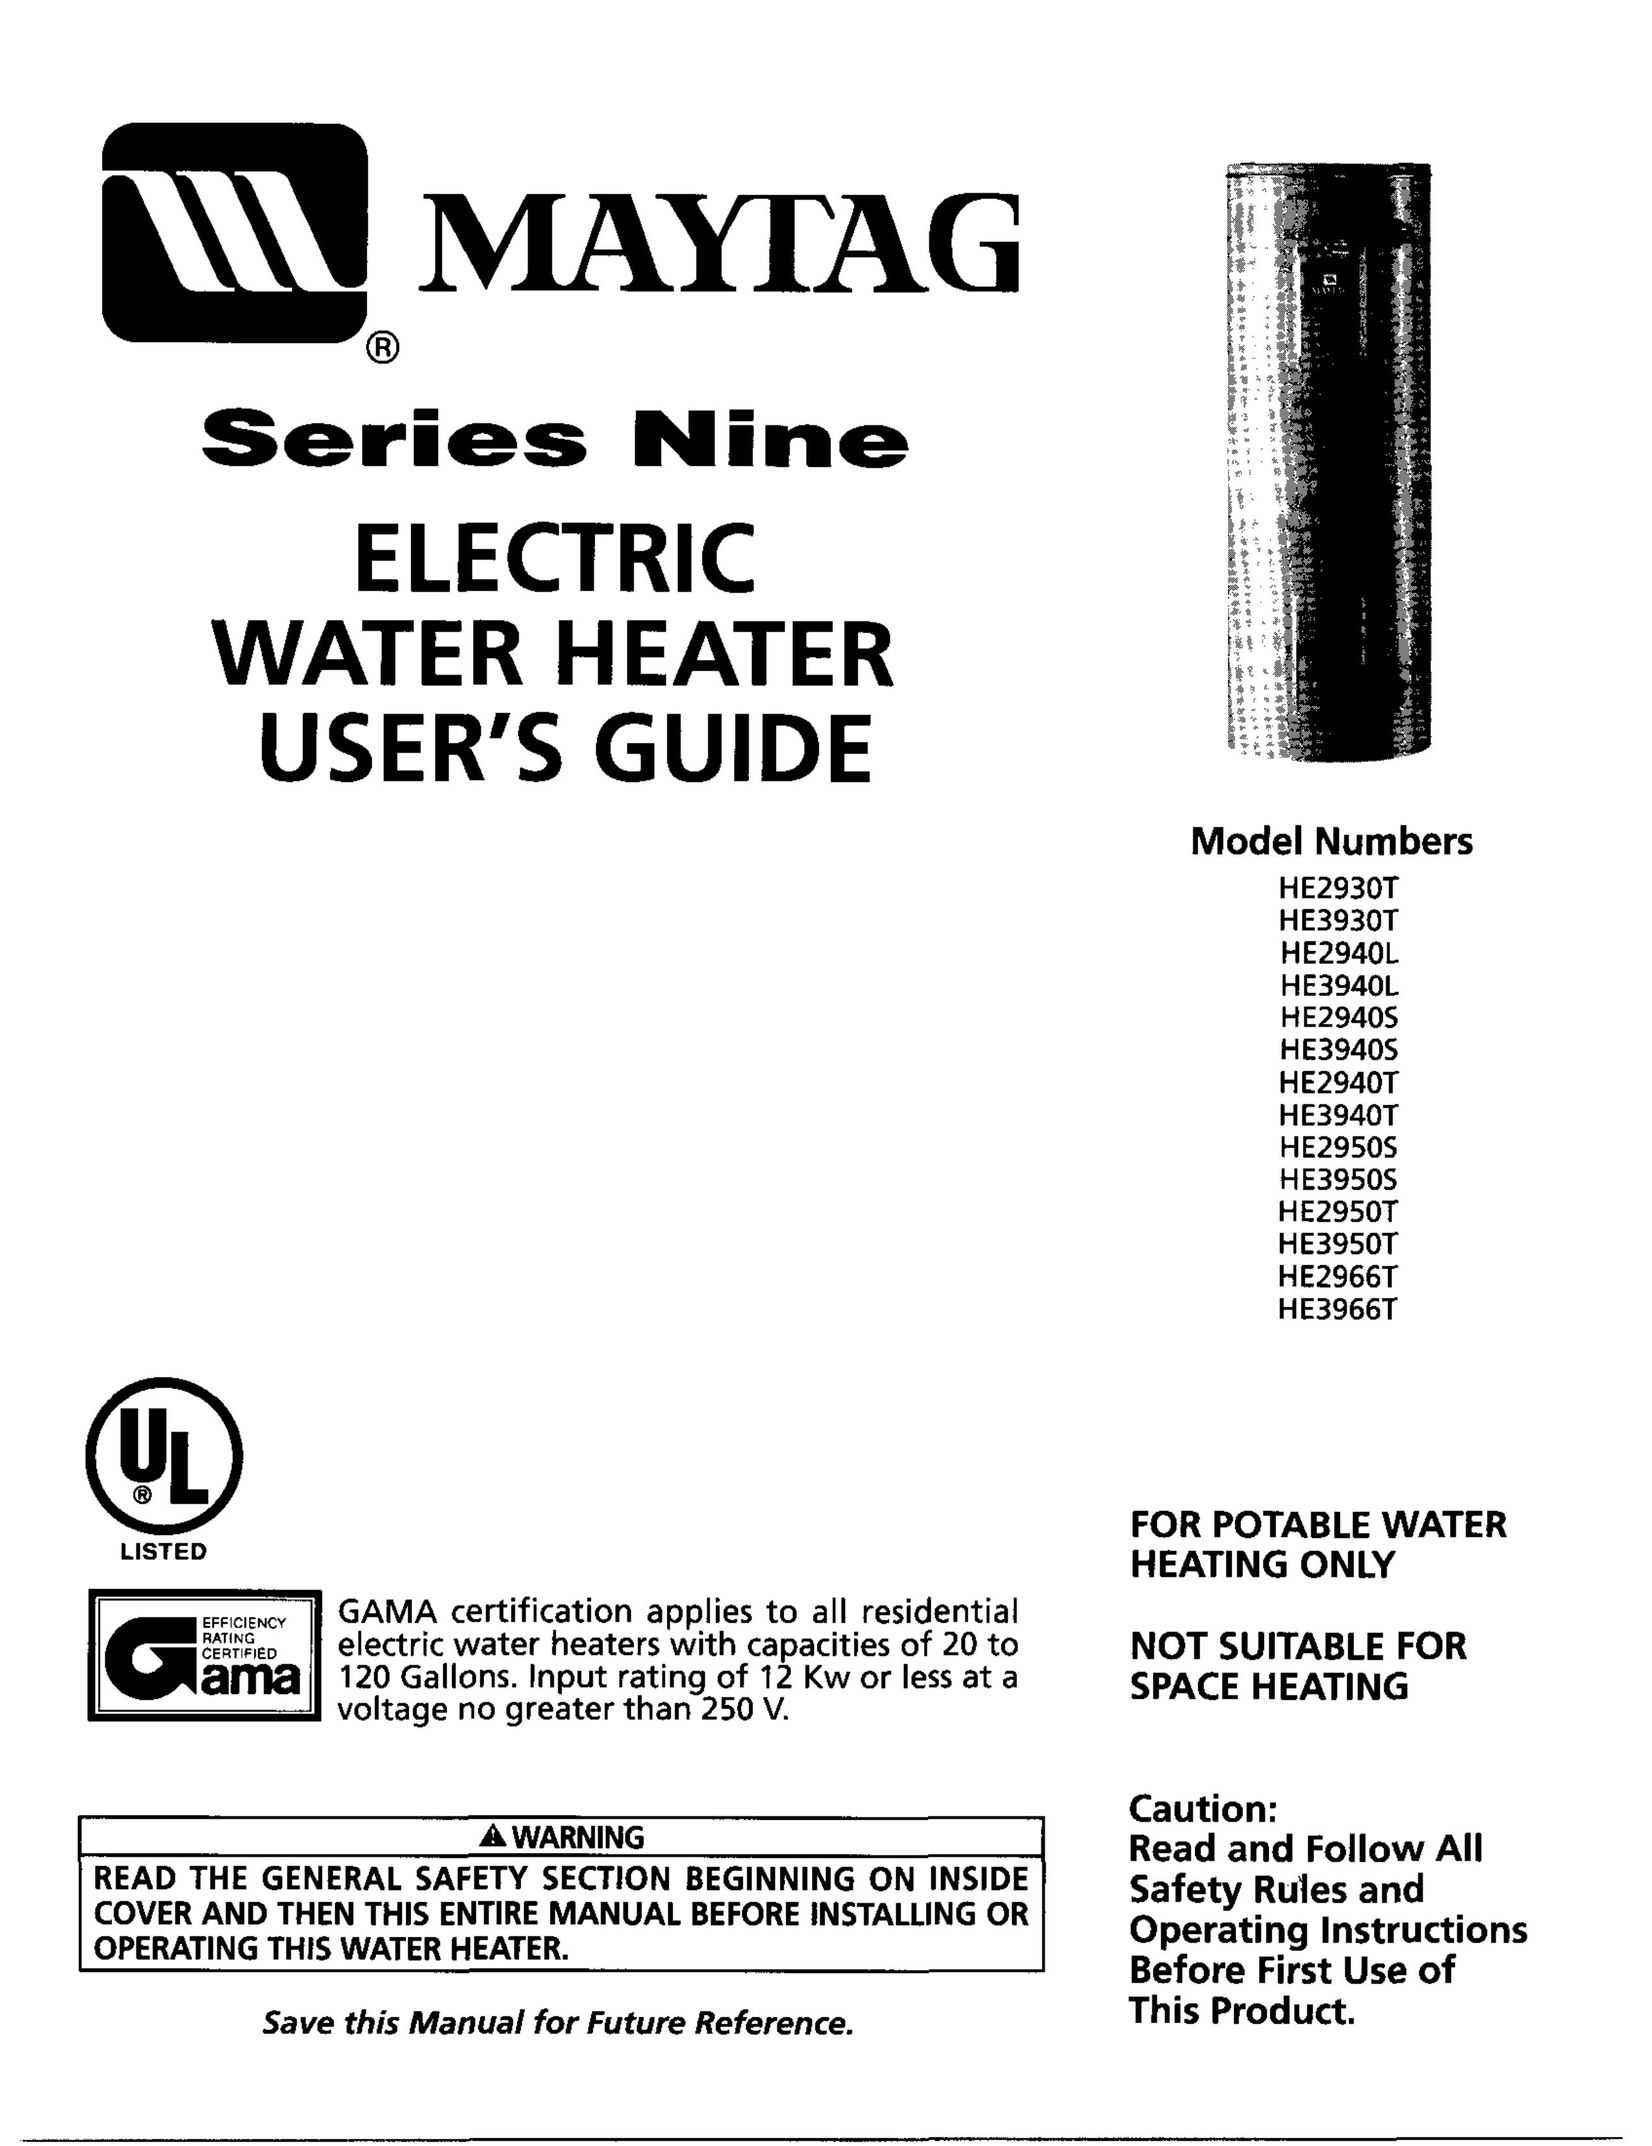 Maytag HE3950T Water Heater User Manual